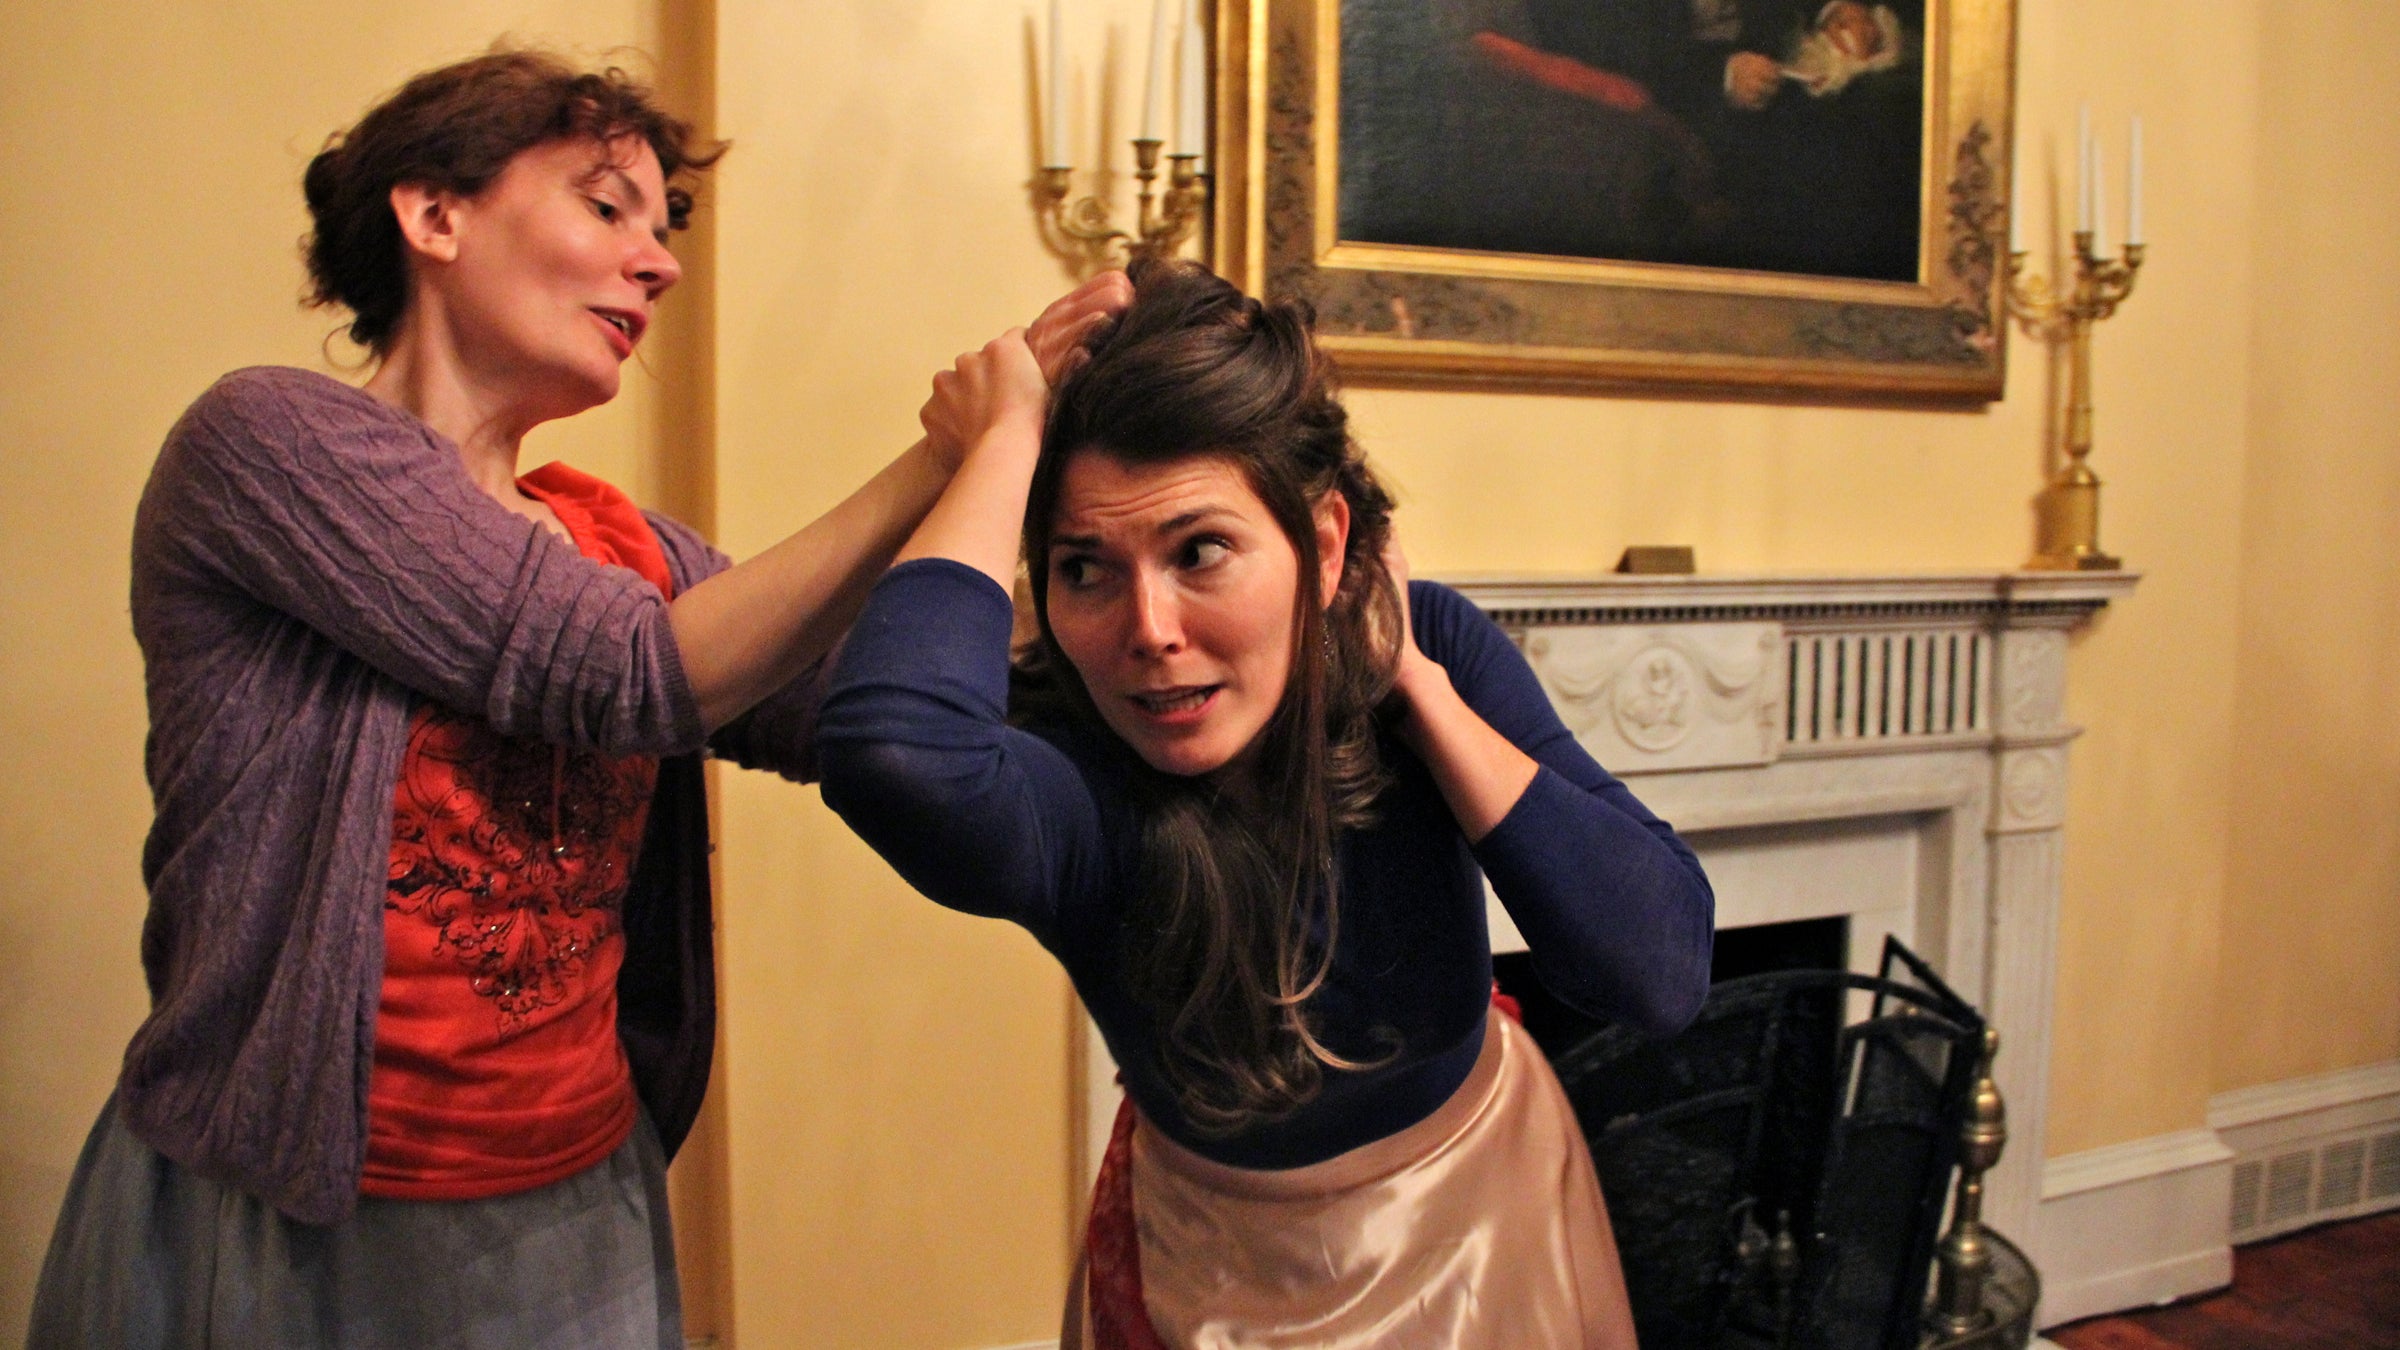  Jennifer Summerfield (left), as Hedda, and Jessica DalCanton as Thea rehearse a fight scene from Hedda Gabler in the historic Physick House in Philadelphia. (Emma Lee/WHYY) 